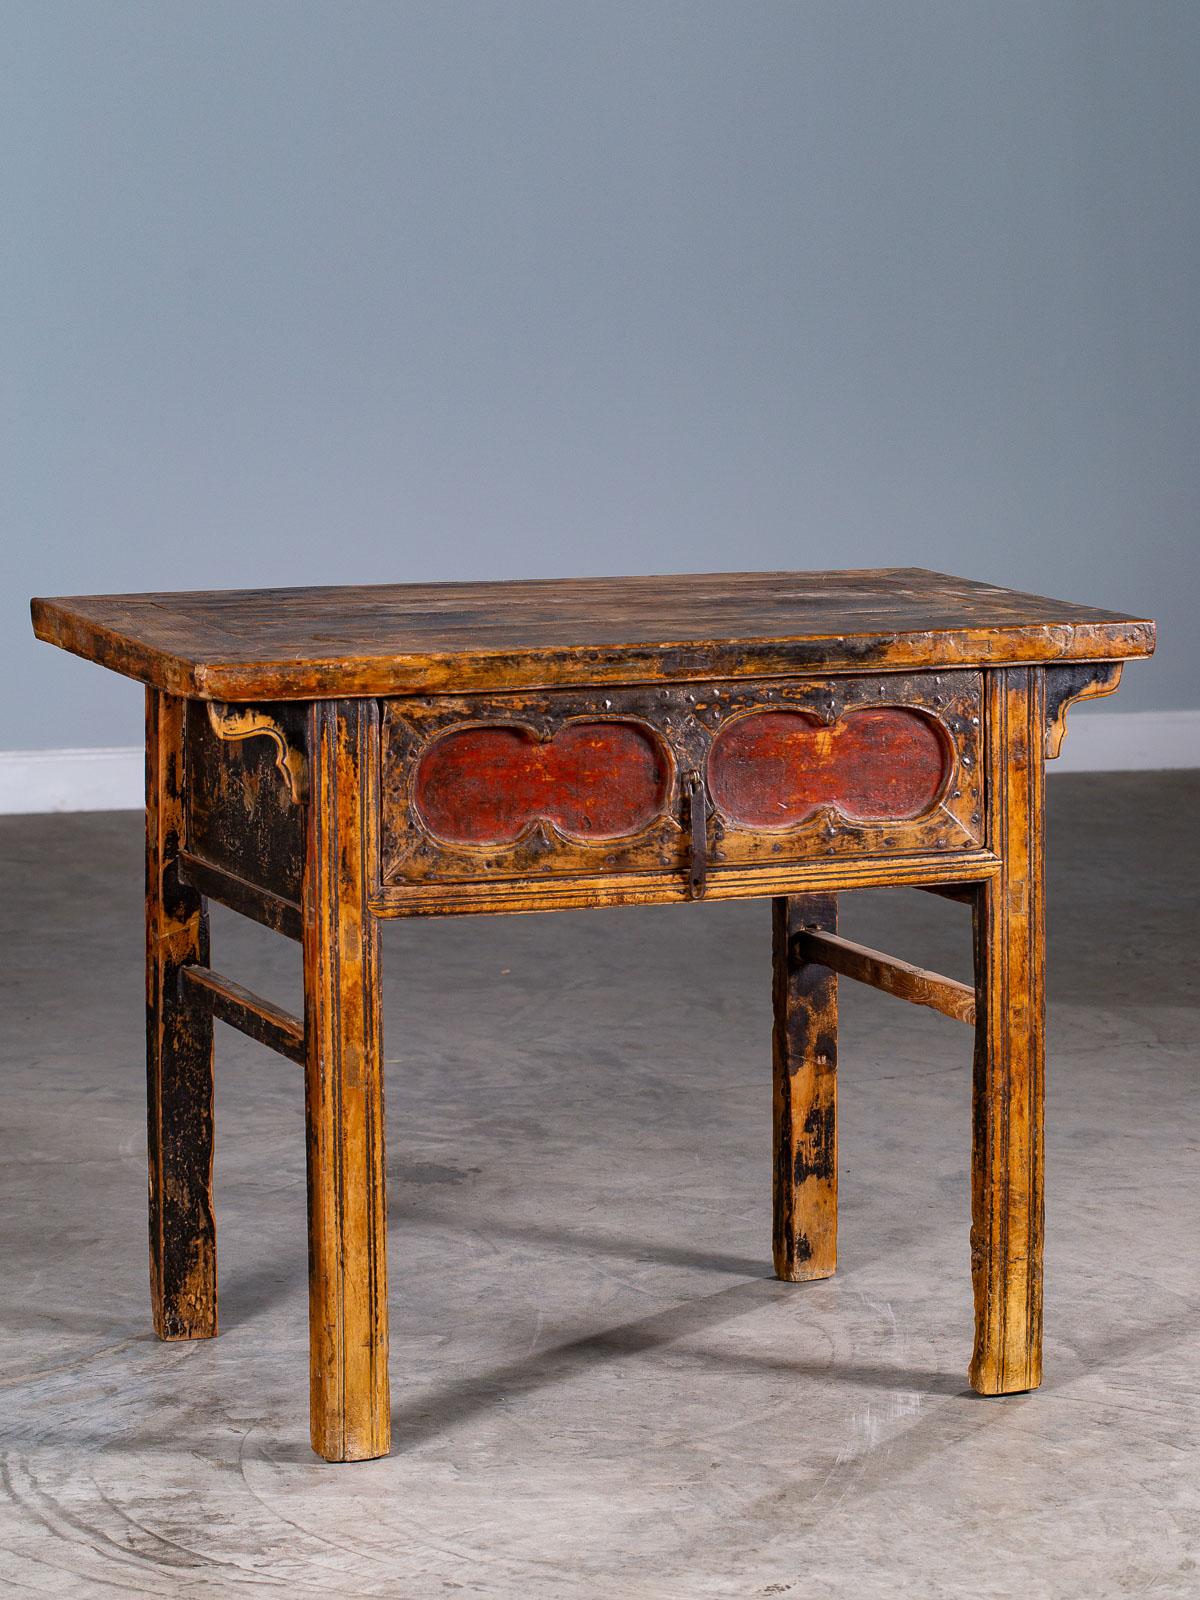 Receive our new selections direct from 1stdibs by email each week. Please click Follow Dealer below and see them first!

This good example of an antique Chinese table circa 1875 has a beautifully weathered surface still showing traces of the